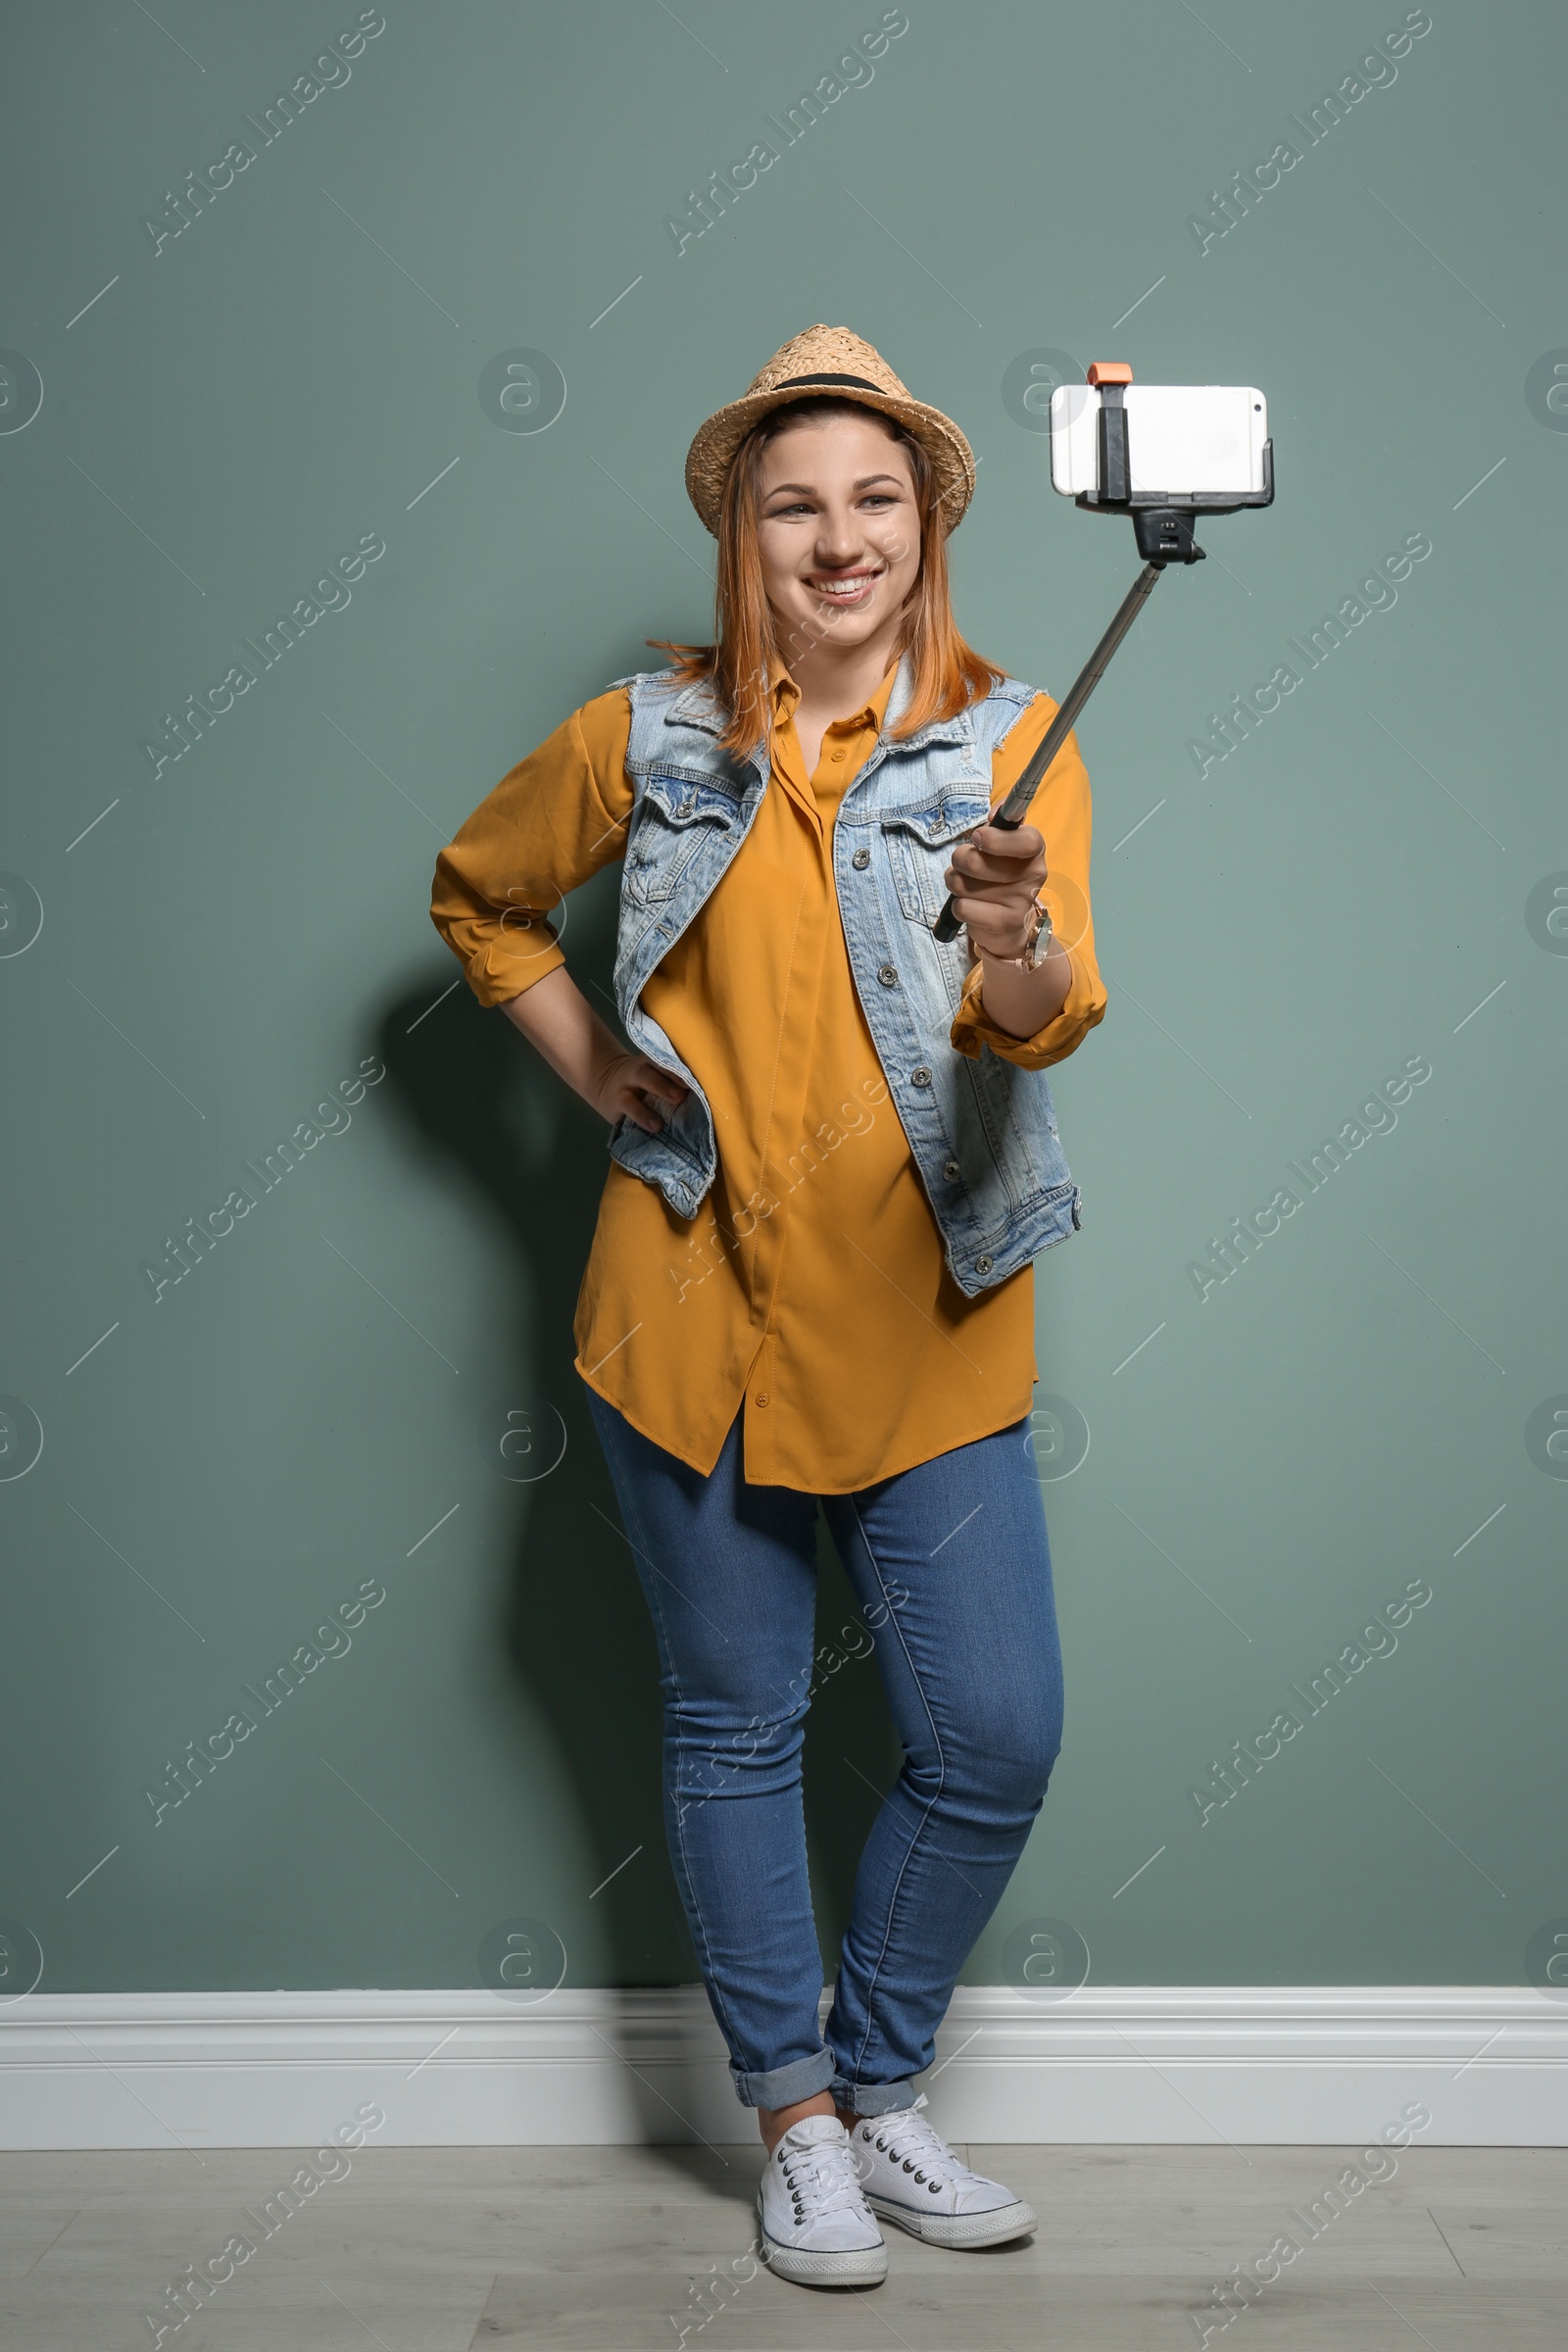 Photo of Attractive young woman taking selfie near color wall